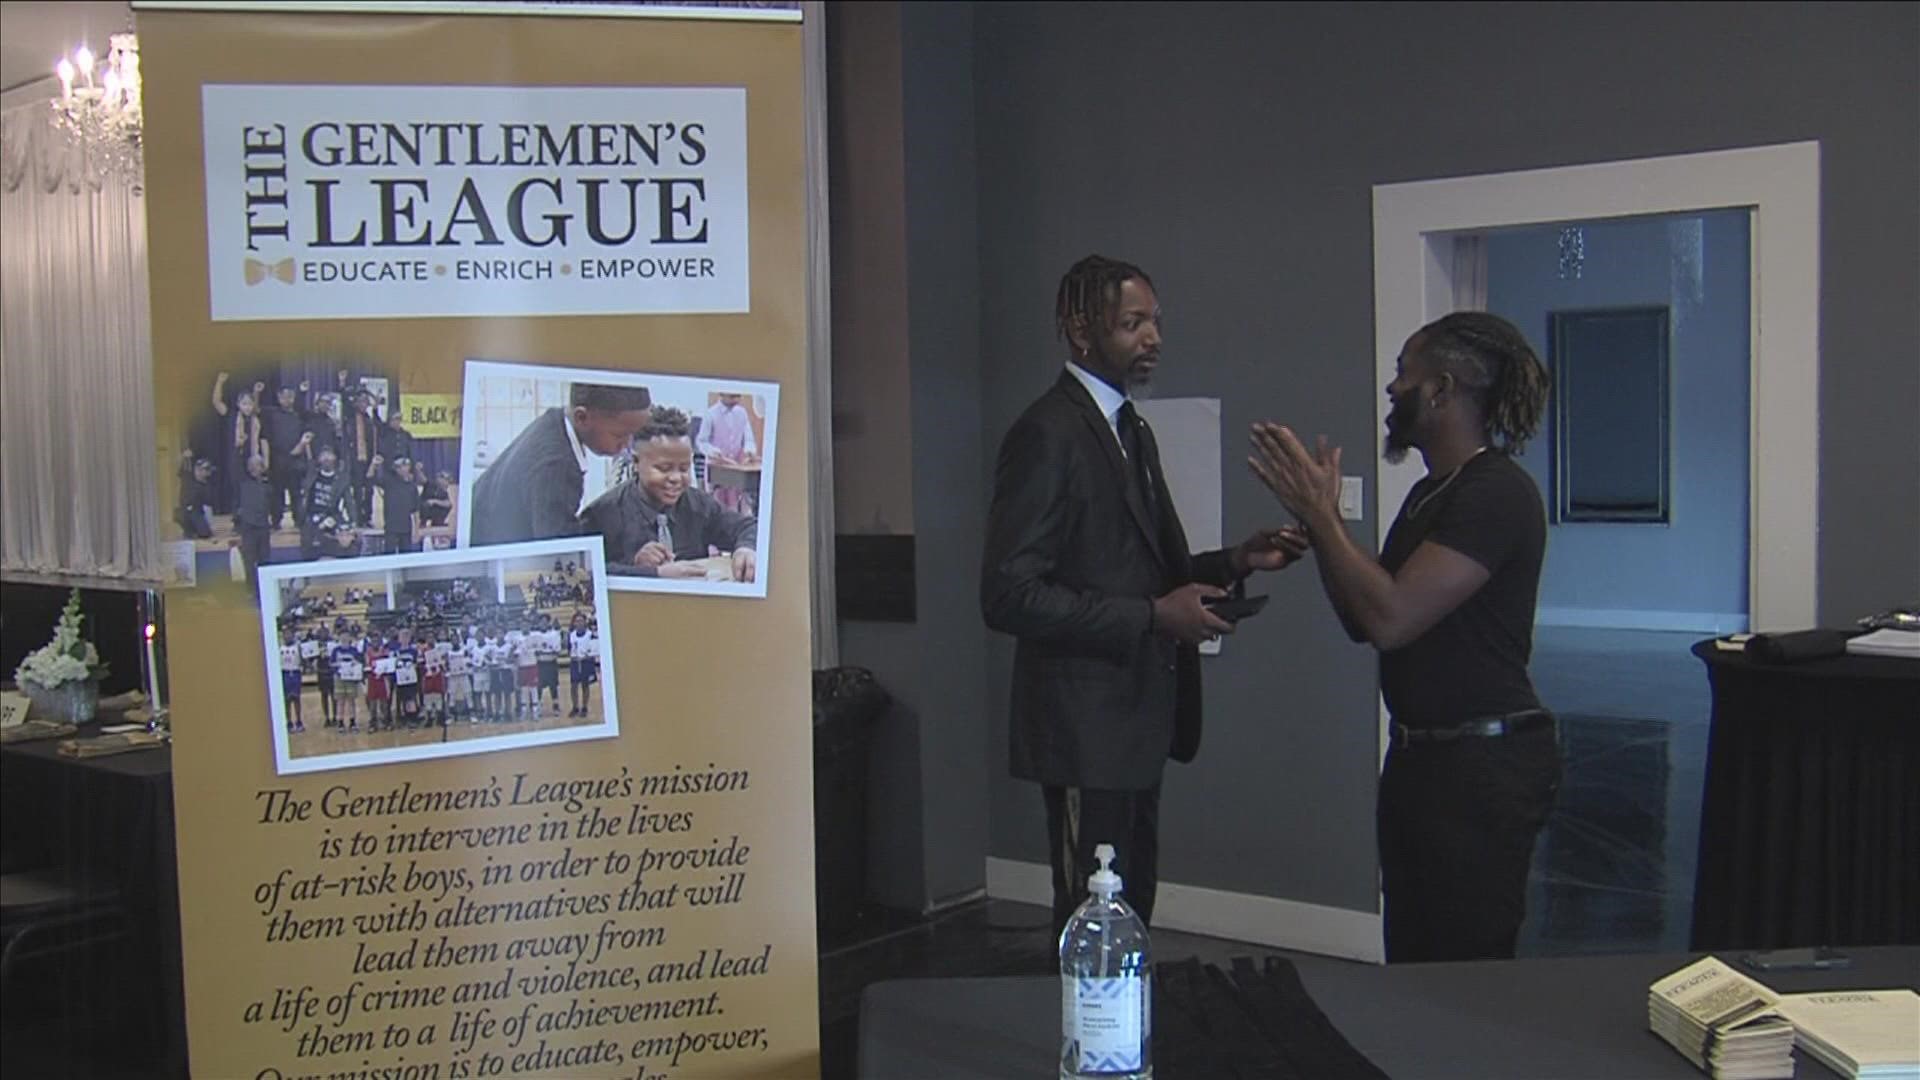 The Gentlemen's League is an all-male mentorship program whose goal is to educate, empower, and enrich young men.